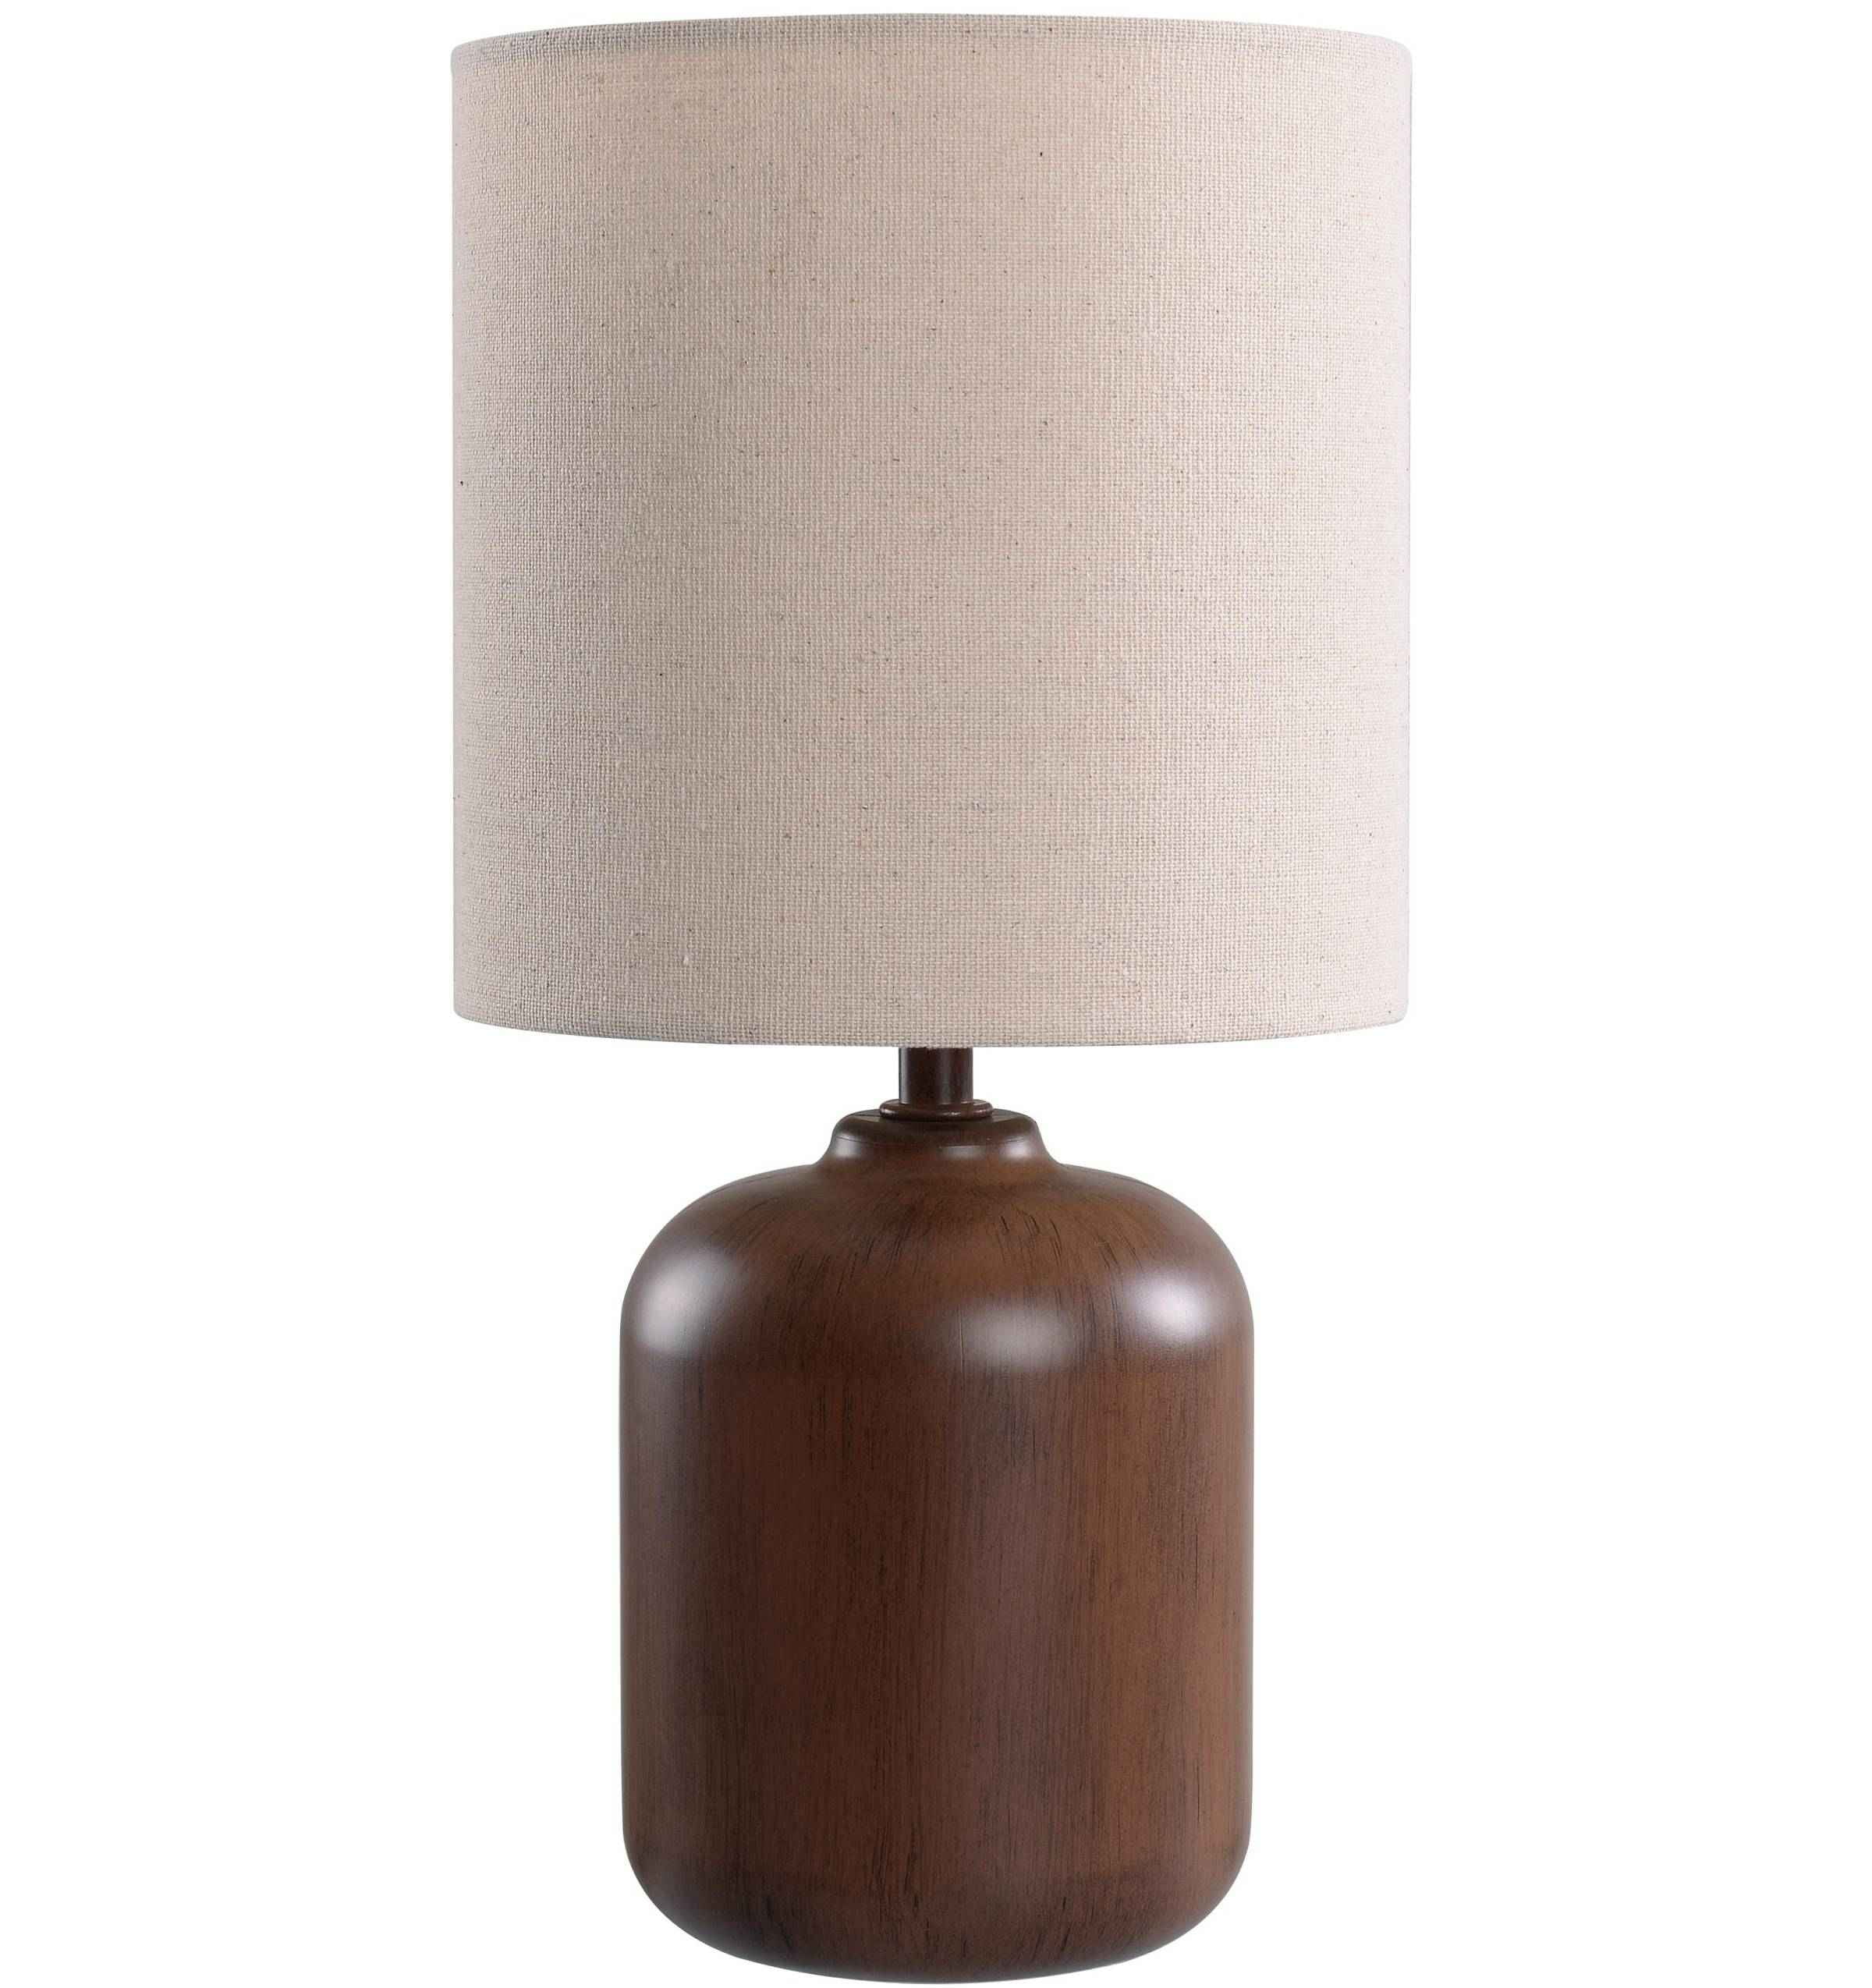 Mainstays Mini Faux Wood Table Lamp with Shade 12.75"H-Wood Finish and Traditional Style